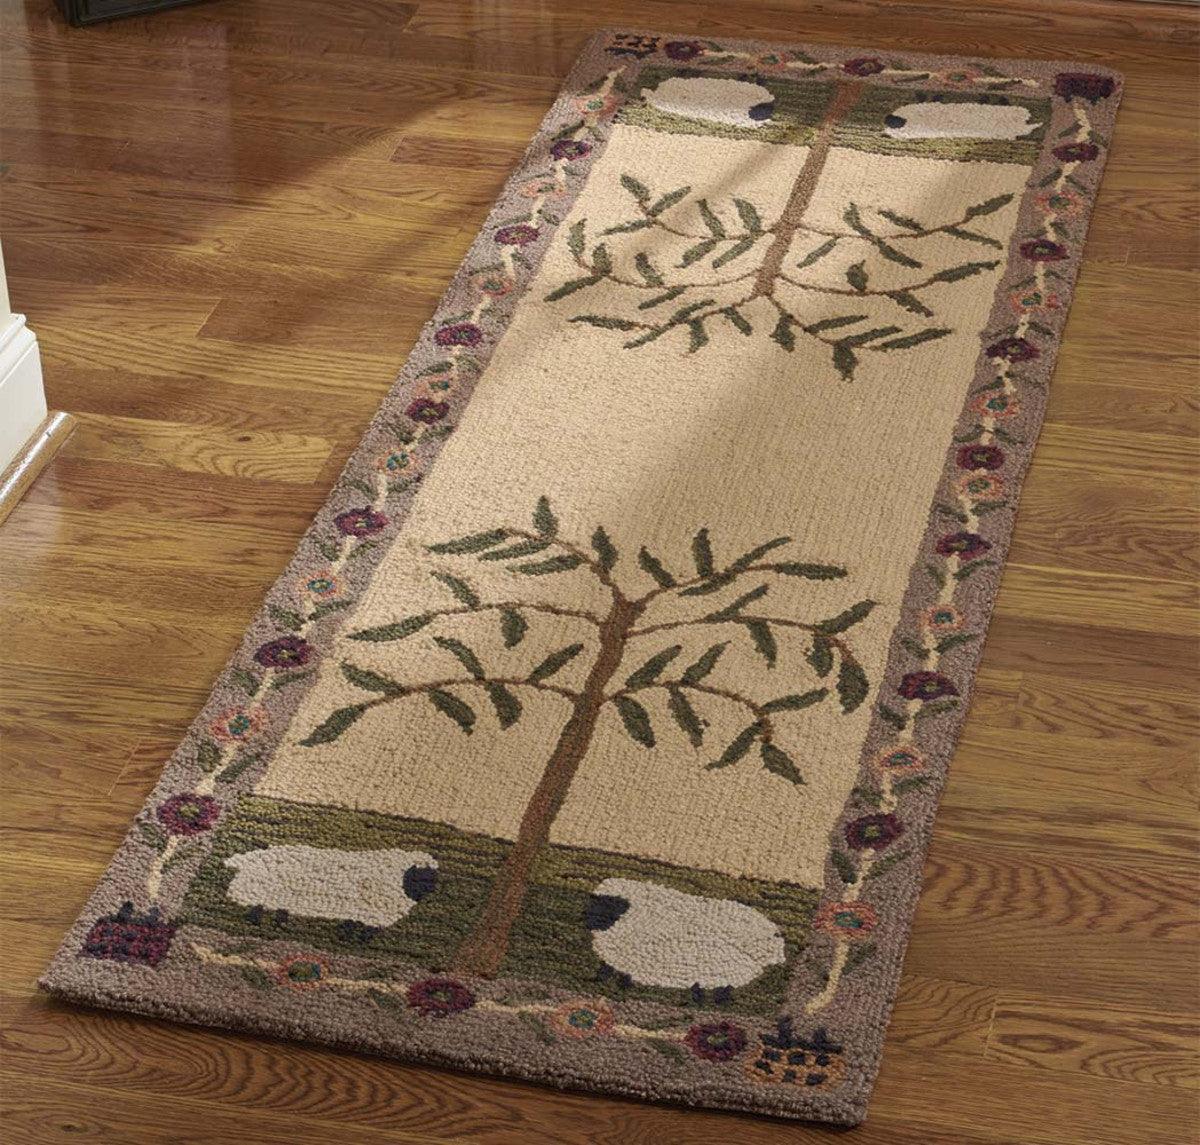 Willow & Sheep Hooked Rug Runner - Park Designs - The Fox Decor